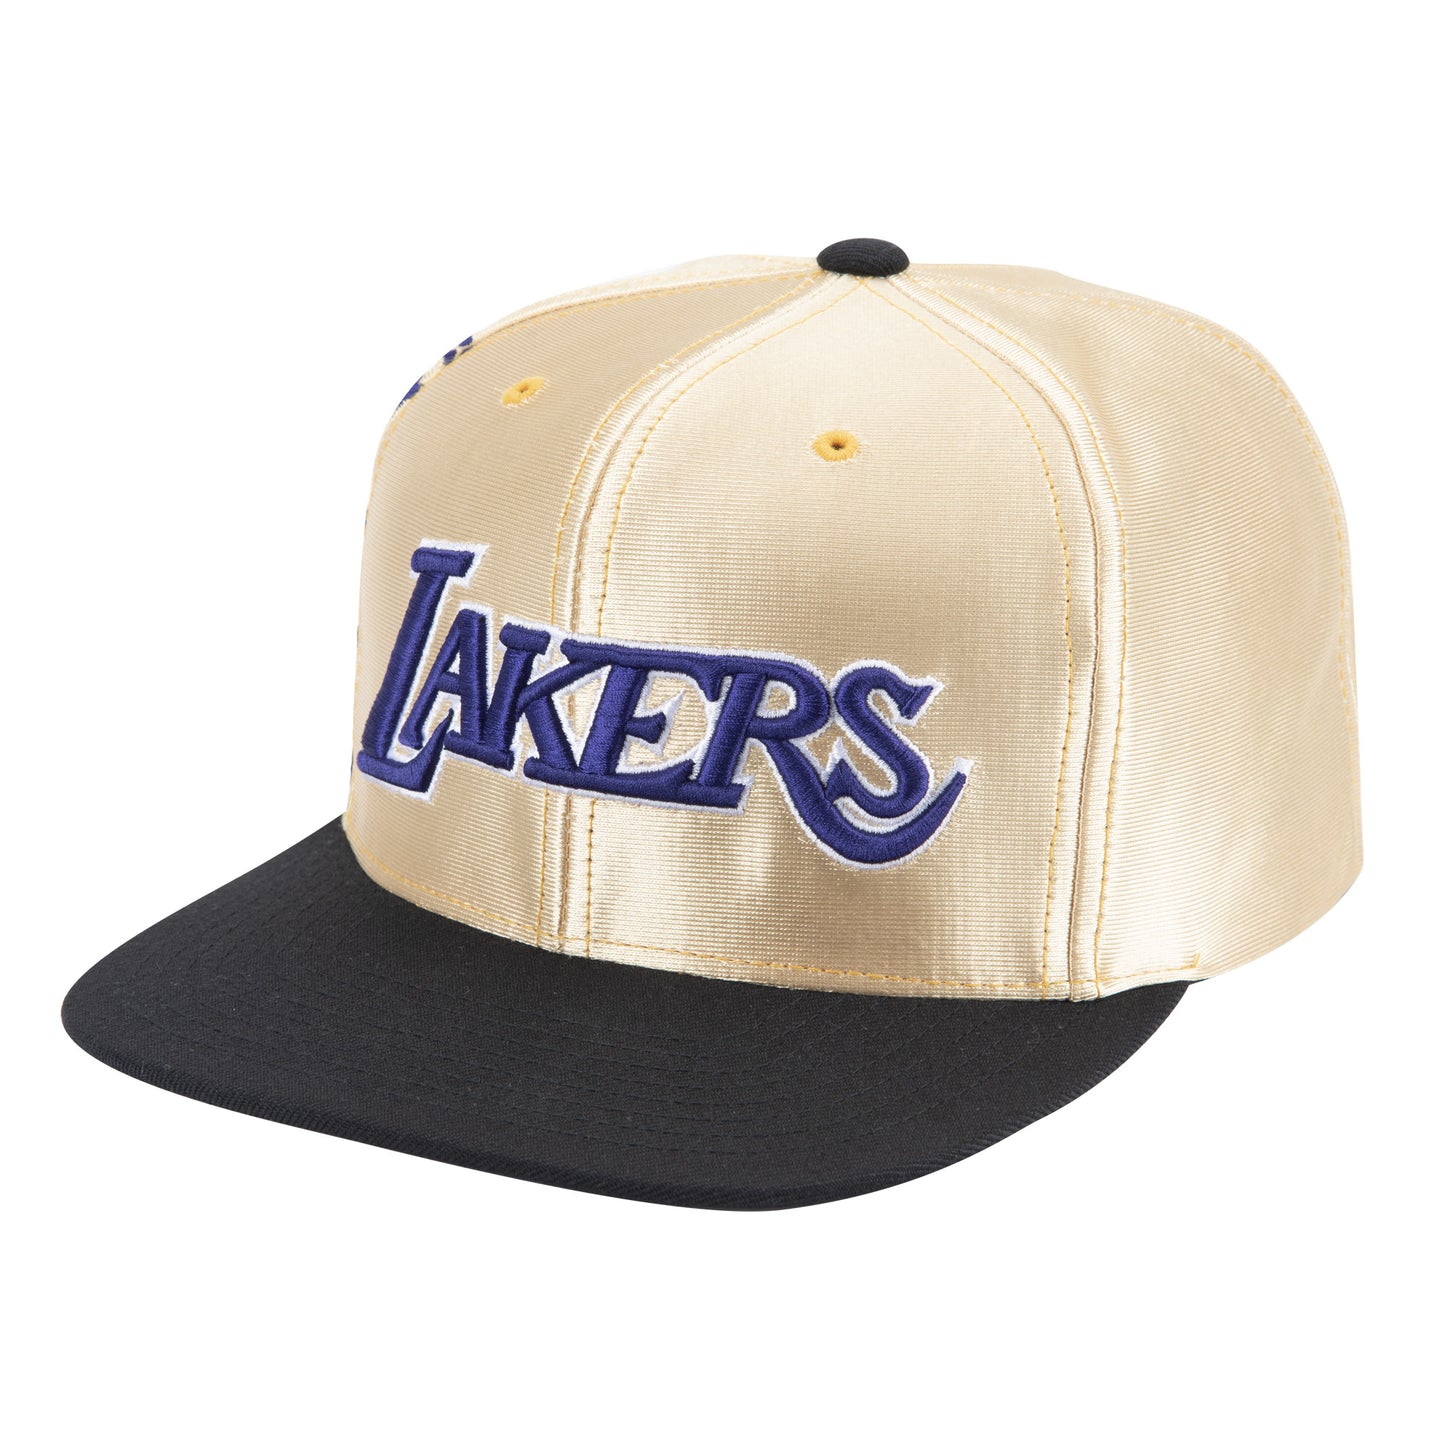 Los Angeles Lakers Mitchell & Ness NBA Omni Branded Snapback Hat